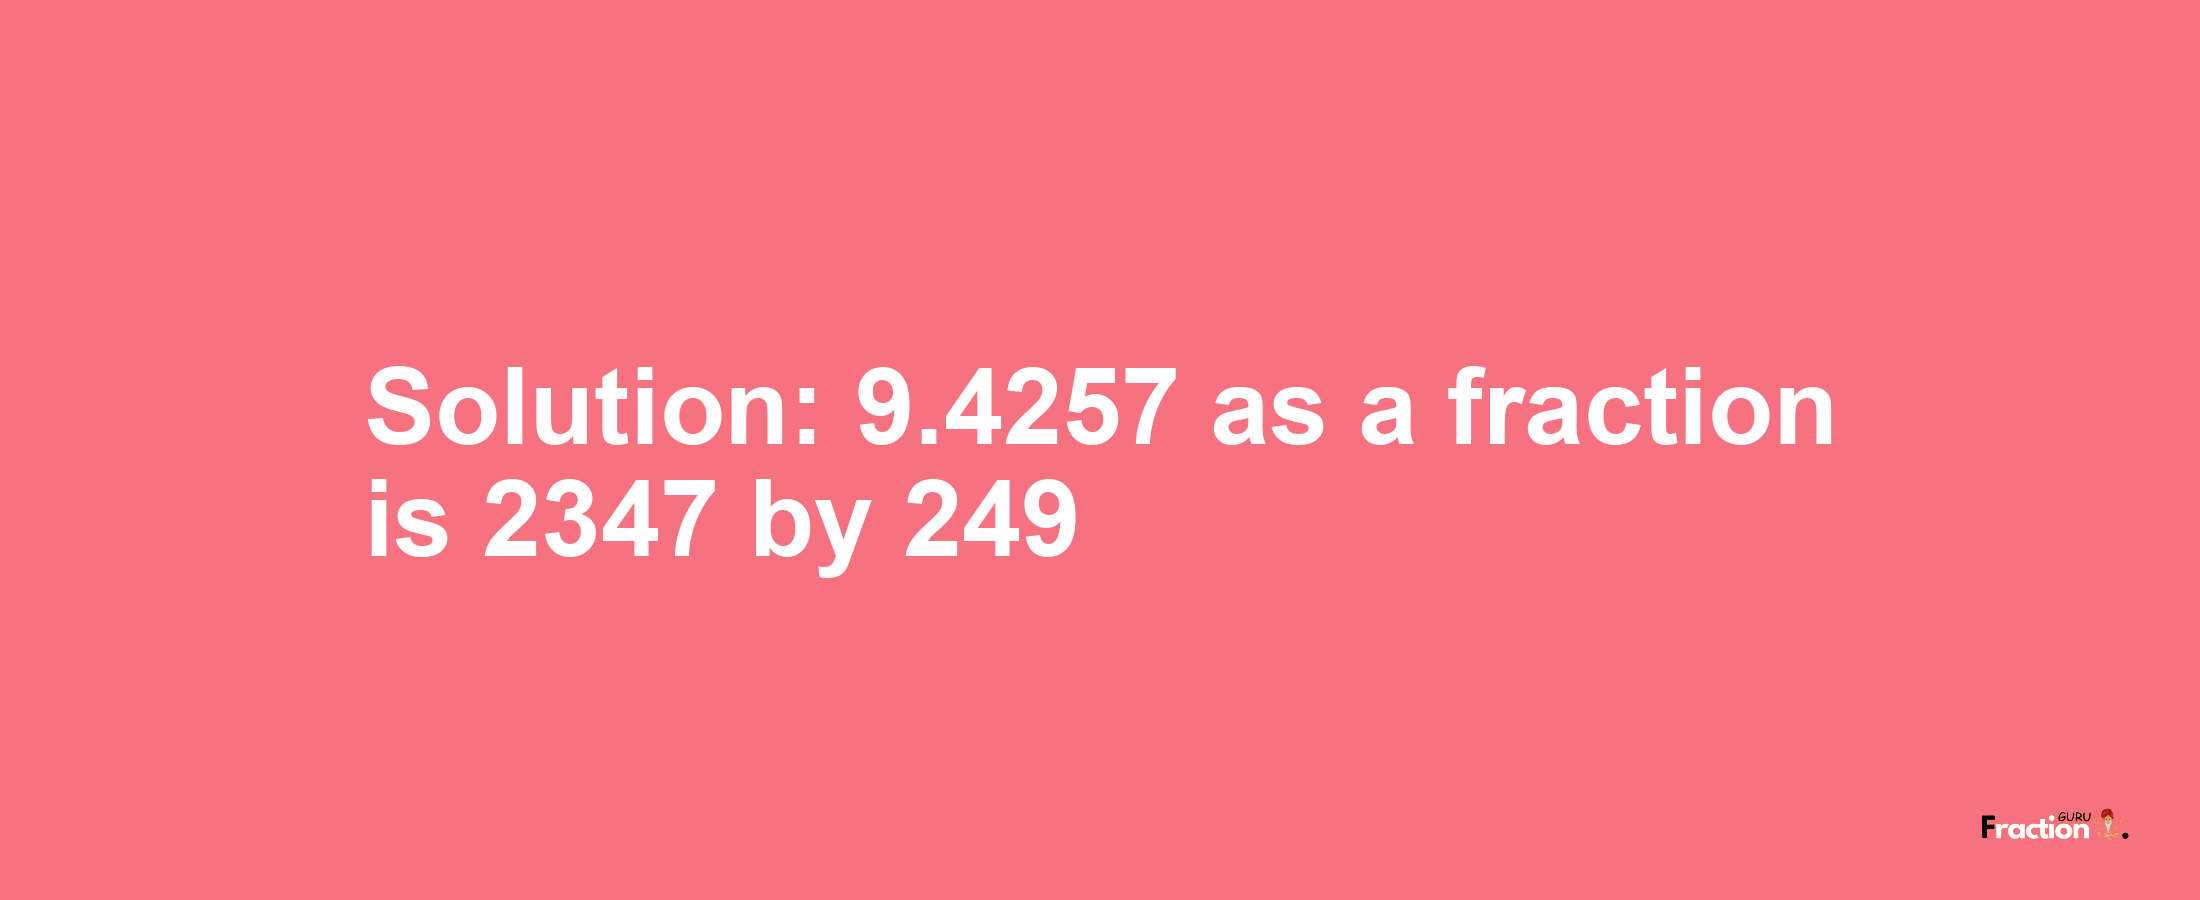 Solution:9.4257 as a fraction is 2347/249